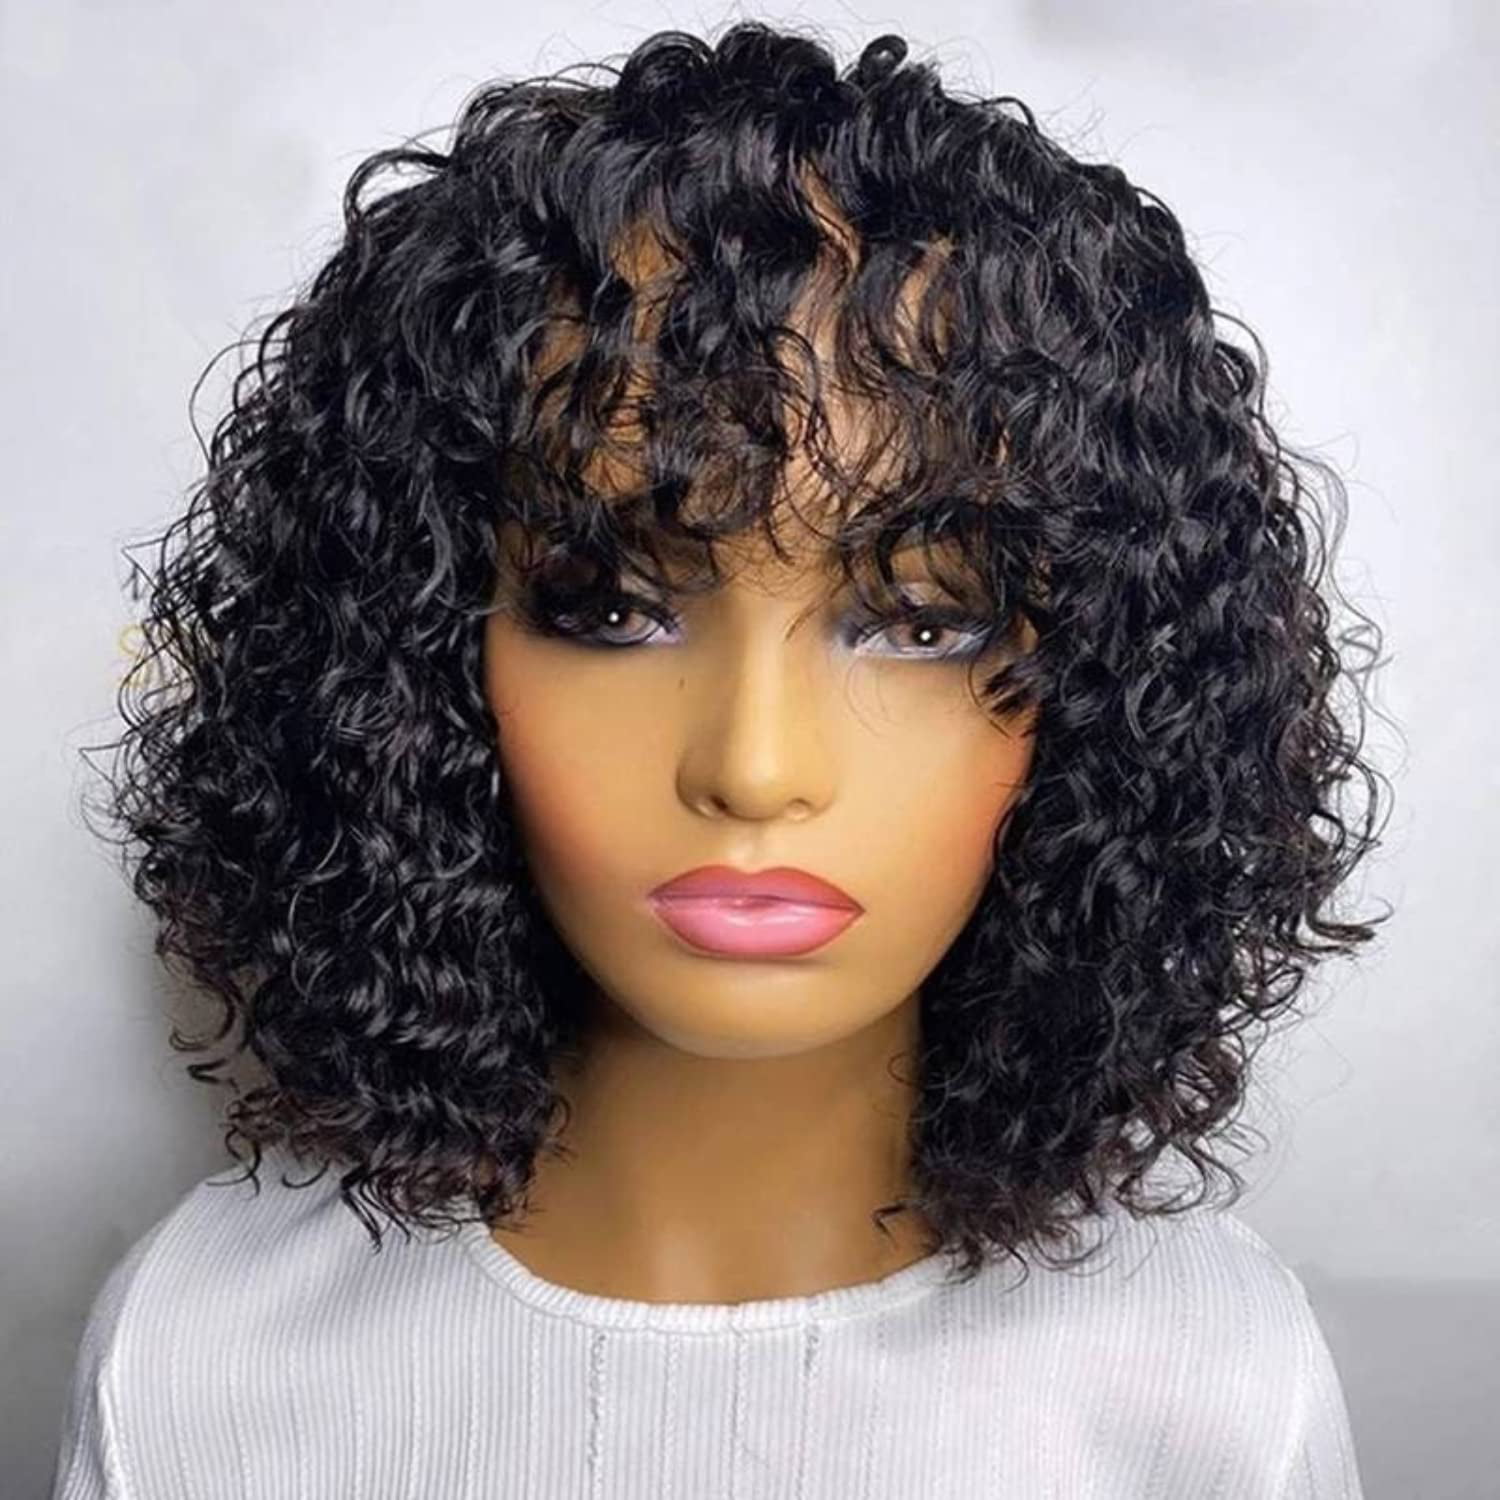 10Inch Short Curly Wigs with Bangs Water Wave Bob Wig Human Hair Short Black  Wig for Black Women 